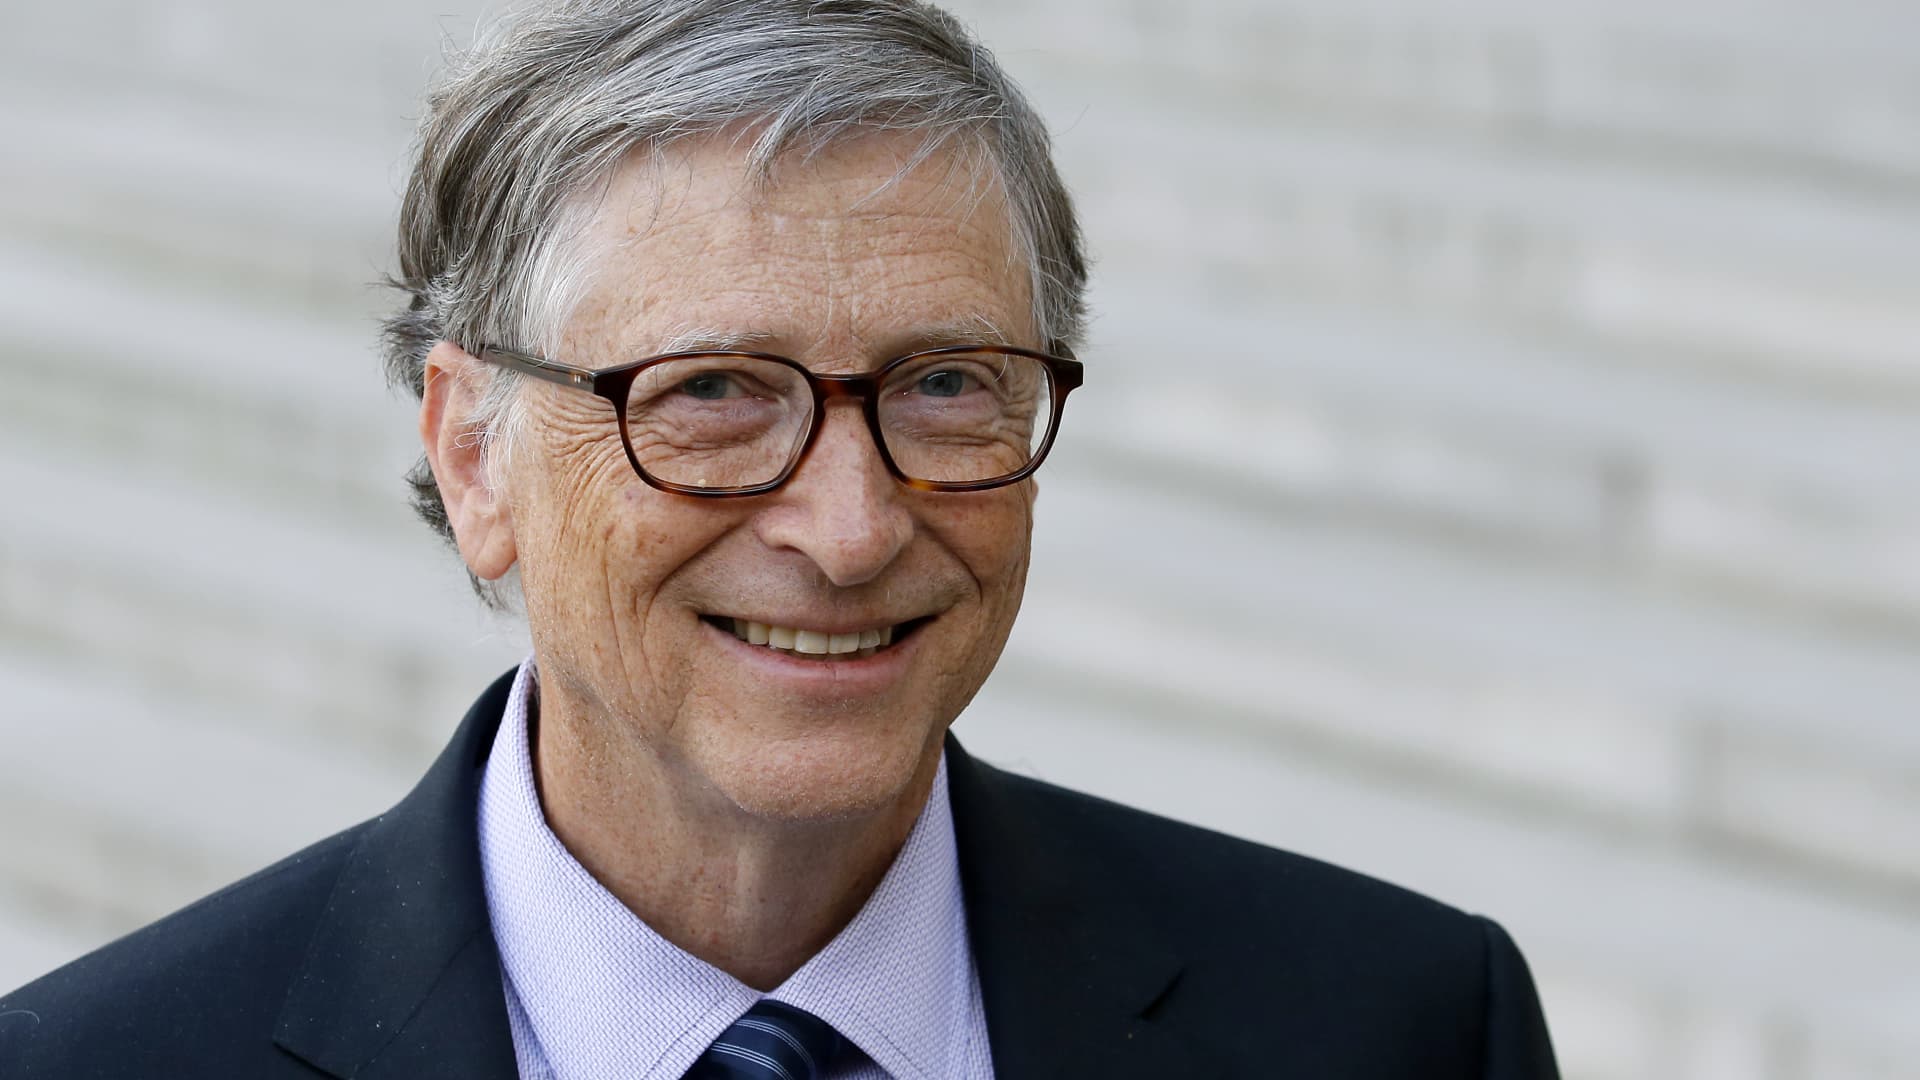 5 must-read books from Bill Gates that are now free on Spotify